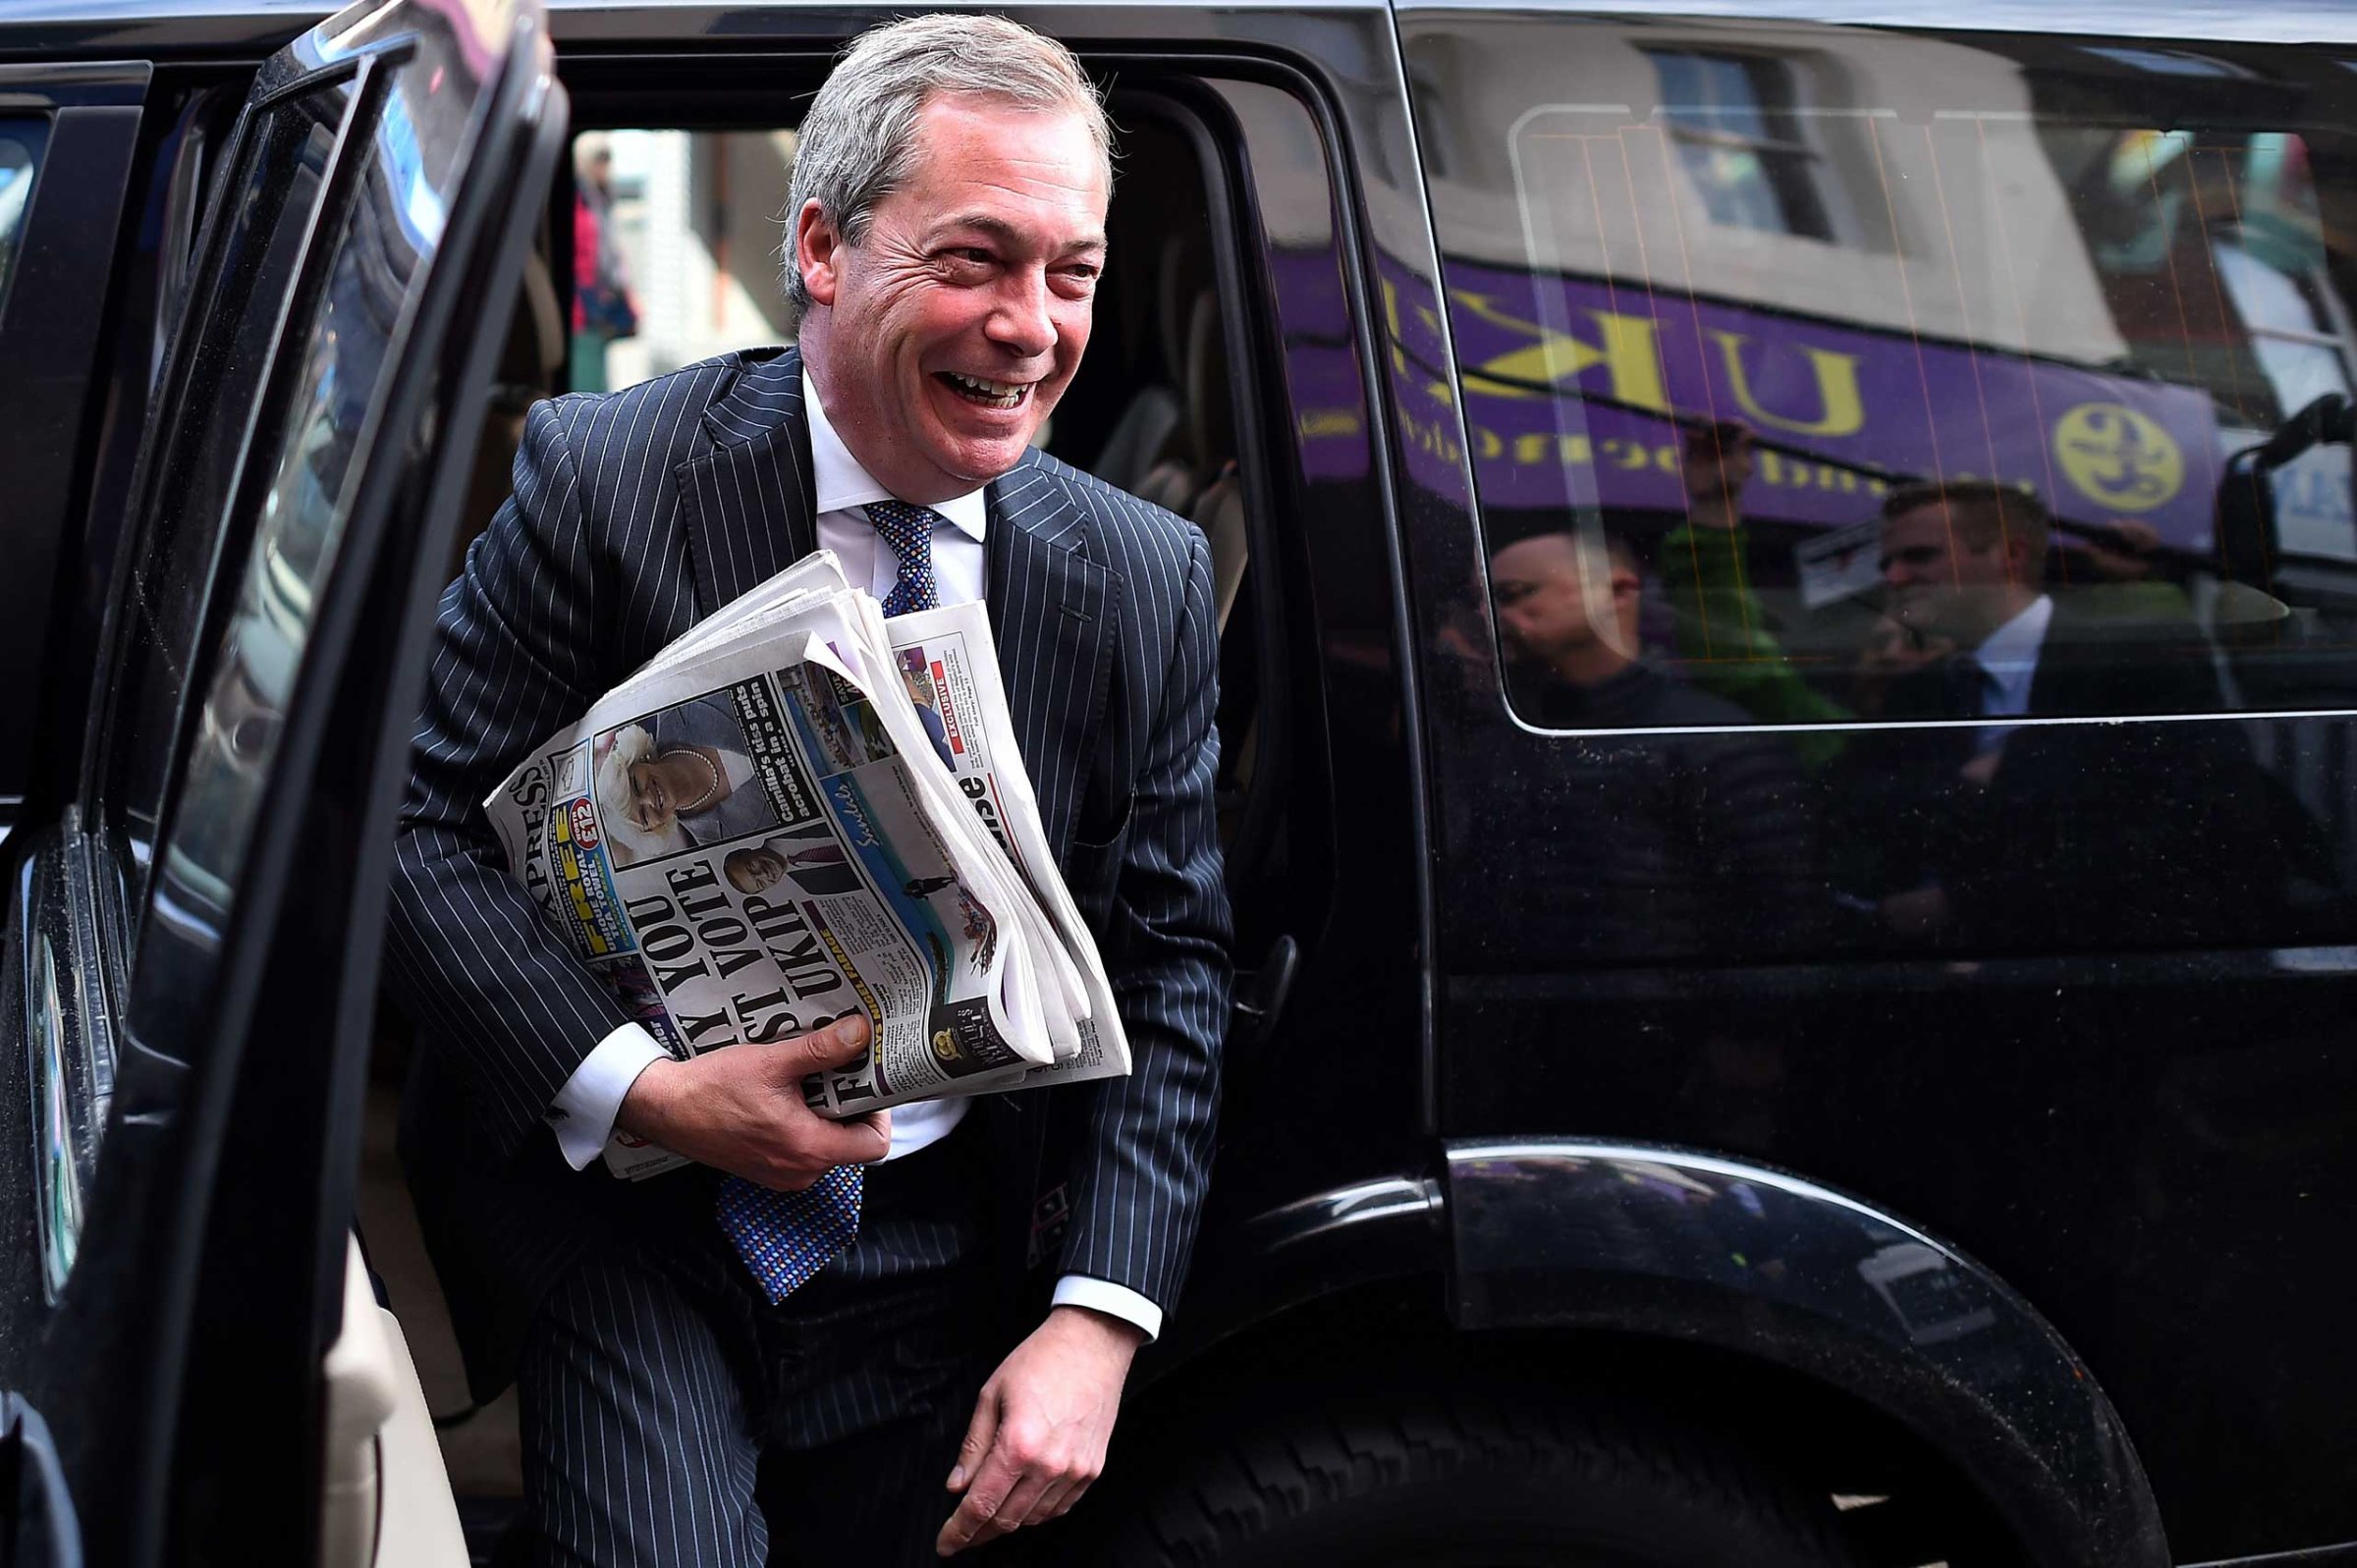 UK Independence Party leader Nigel Farage arrives for a campaign visit in Ramsgate in south east England on May 6, 2015, on the eve of a general election in Britain.